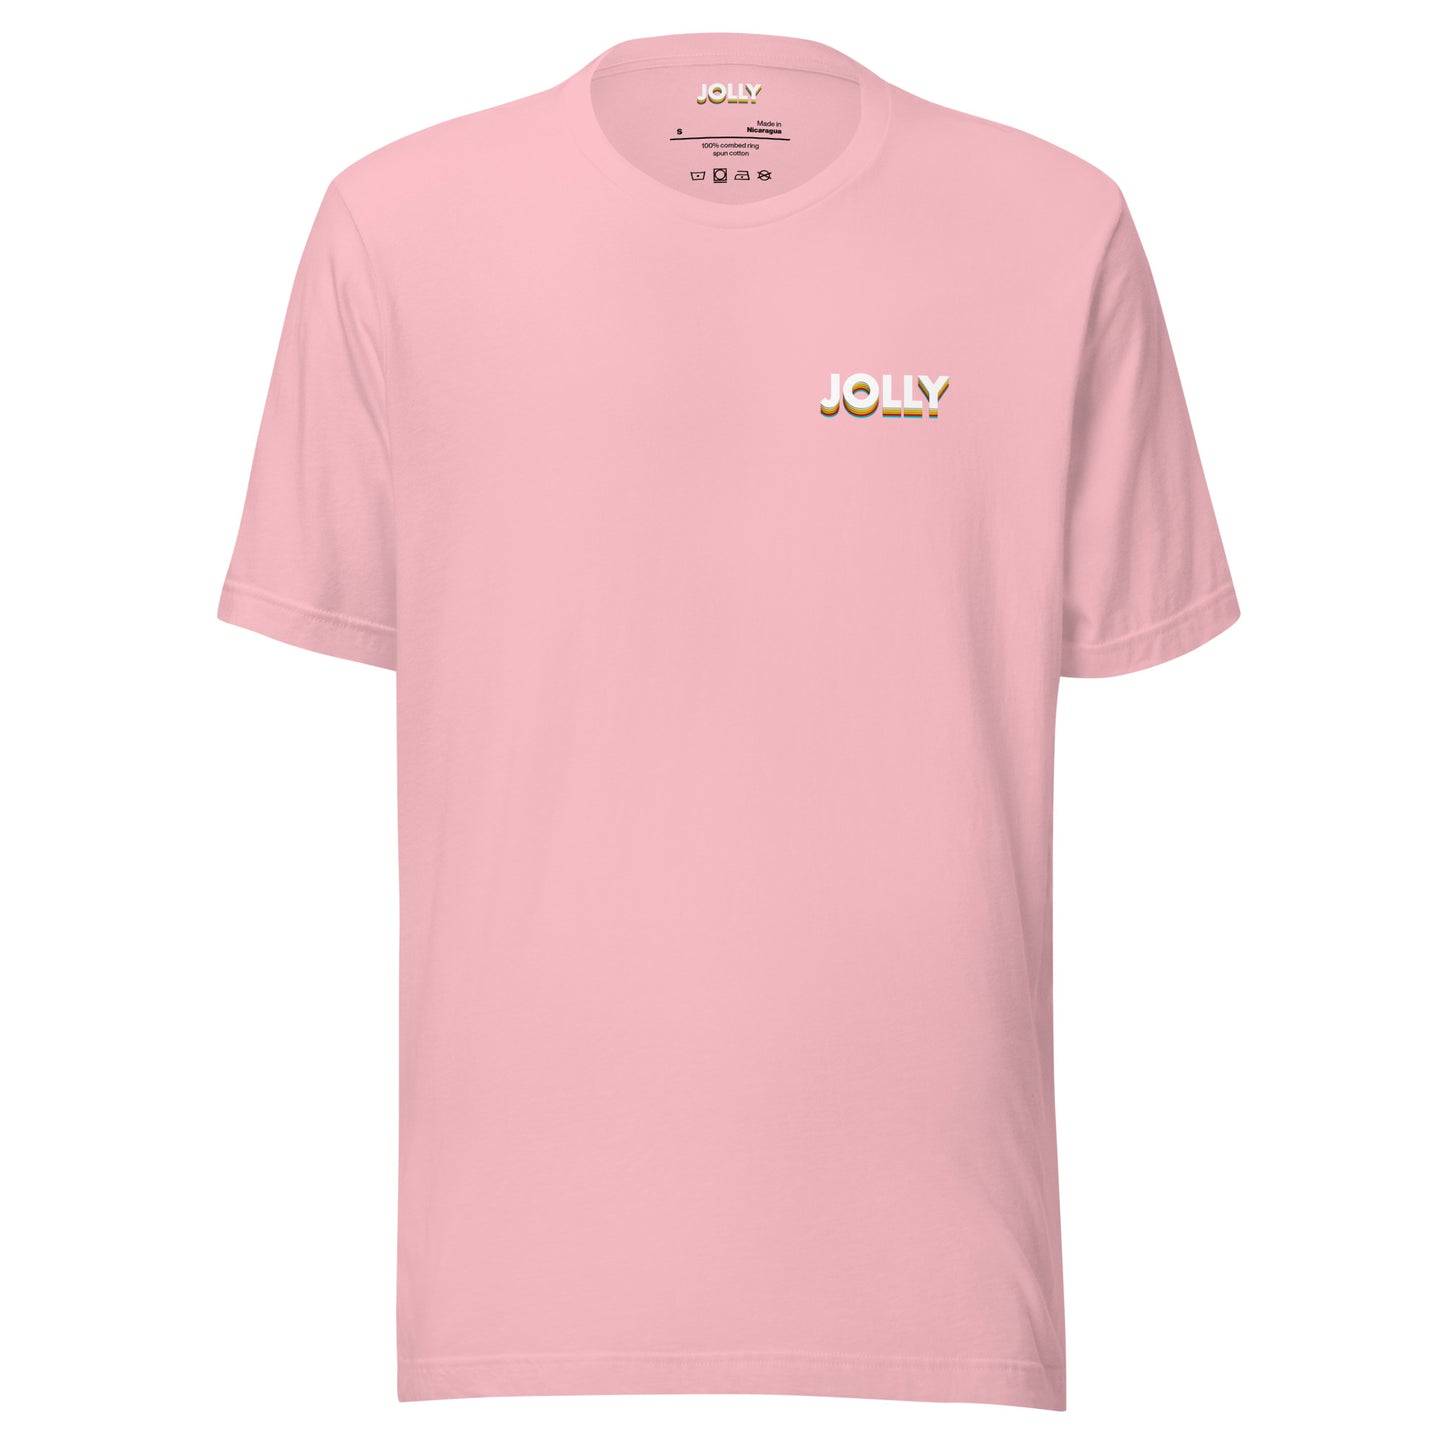 JOLLY Small Color T-Shirt